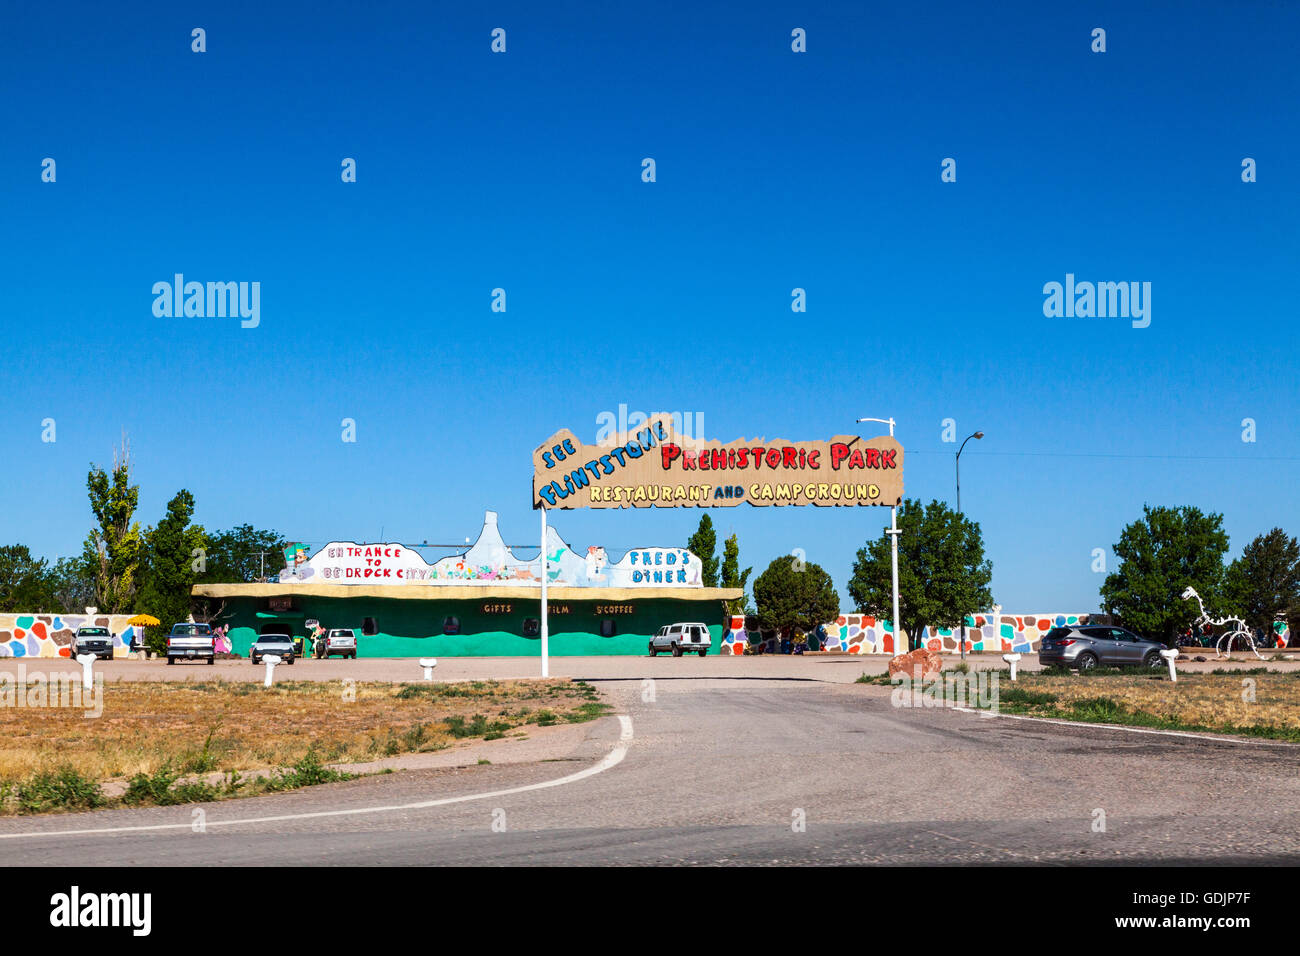 The Flintstones Bedrock City in Arizona at the Junction of highways 64 and 180 The Grand Canyon Highway Stock Photo